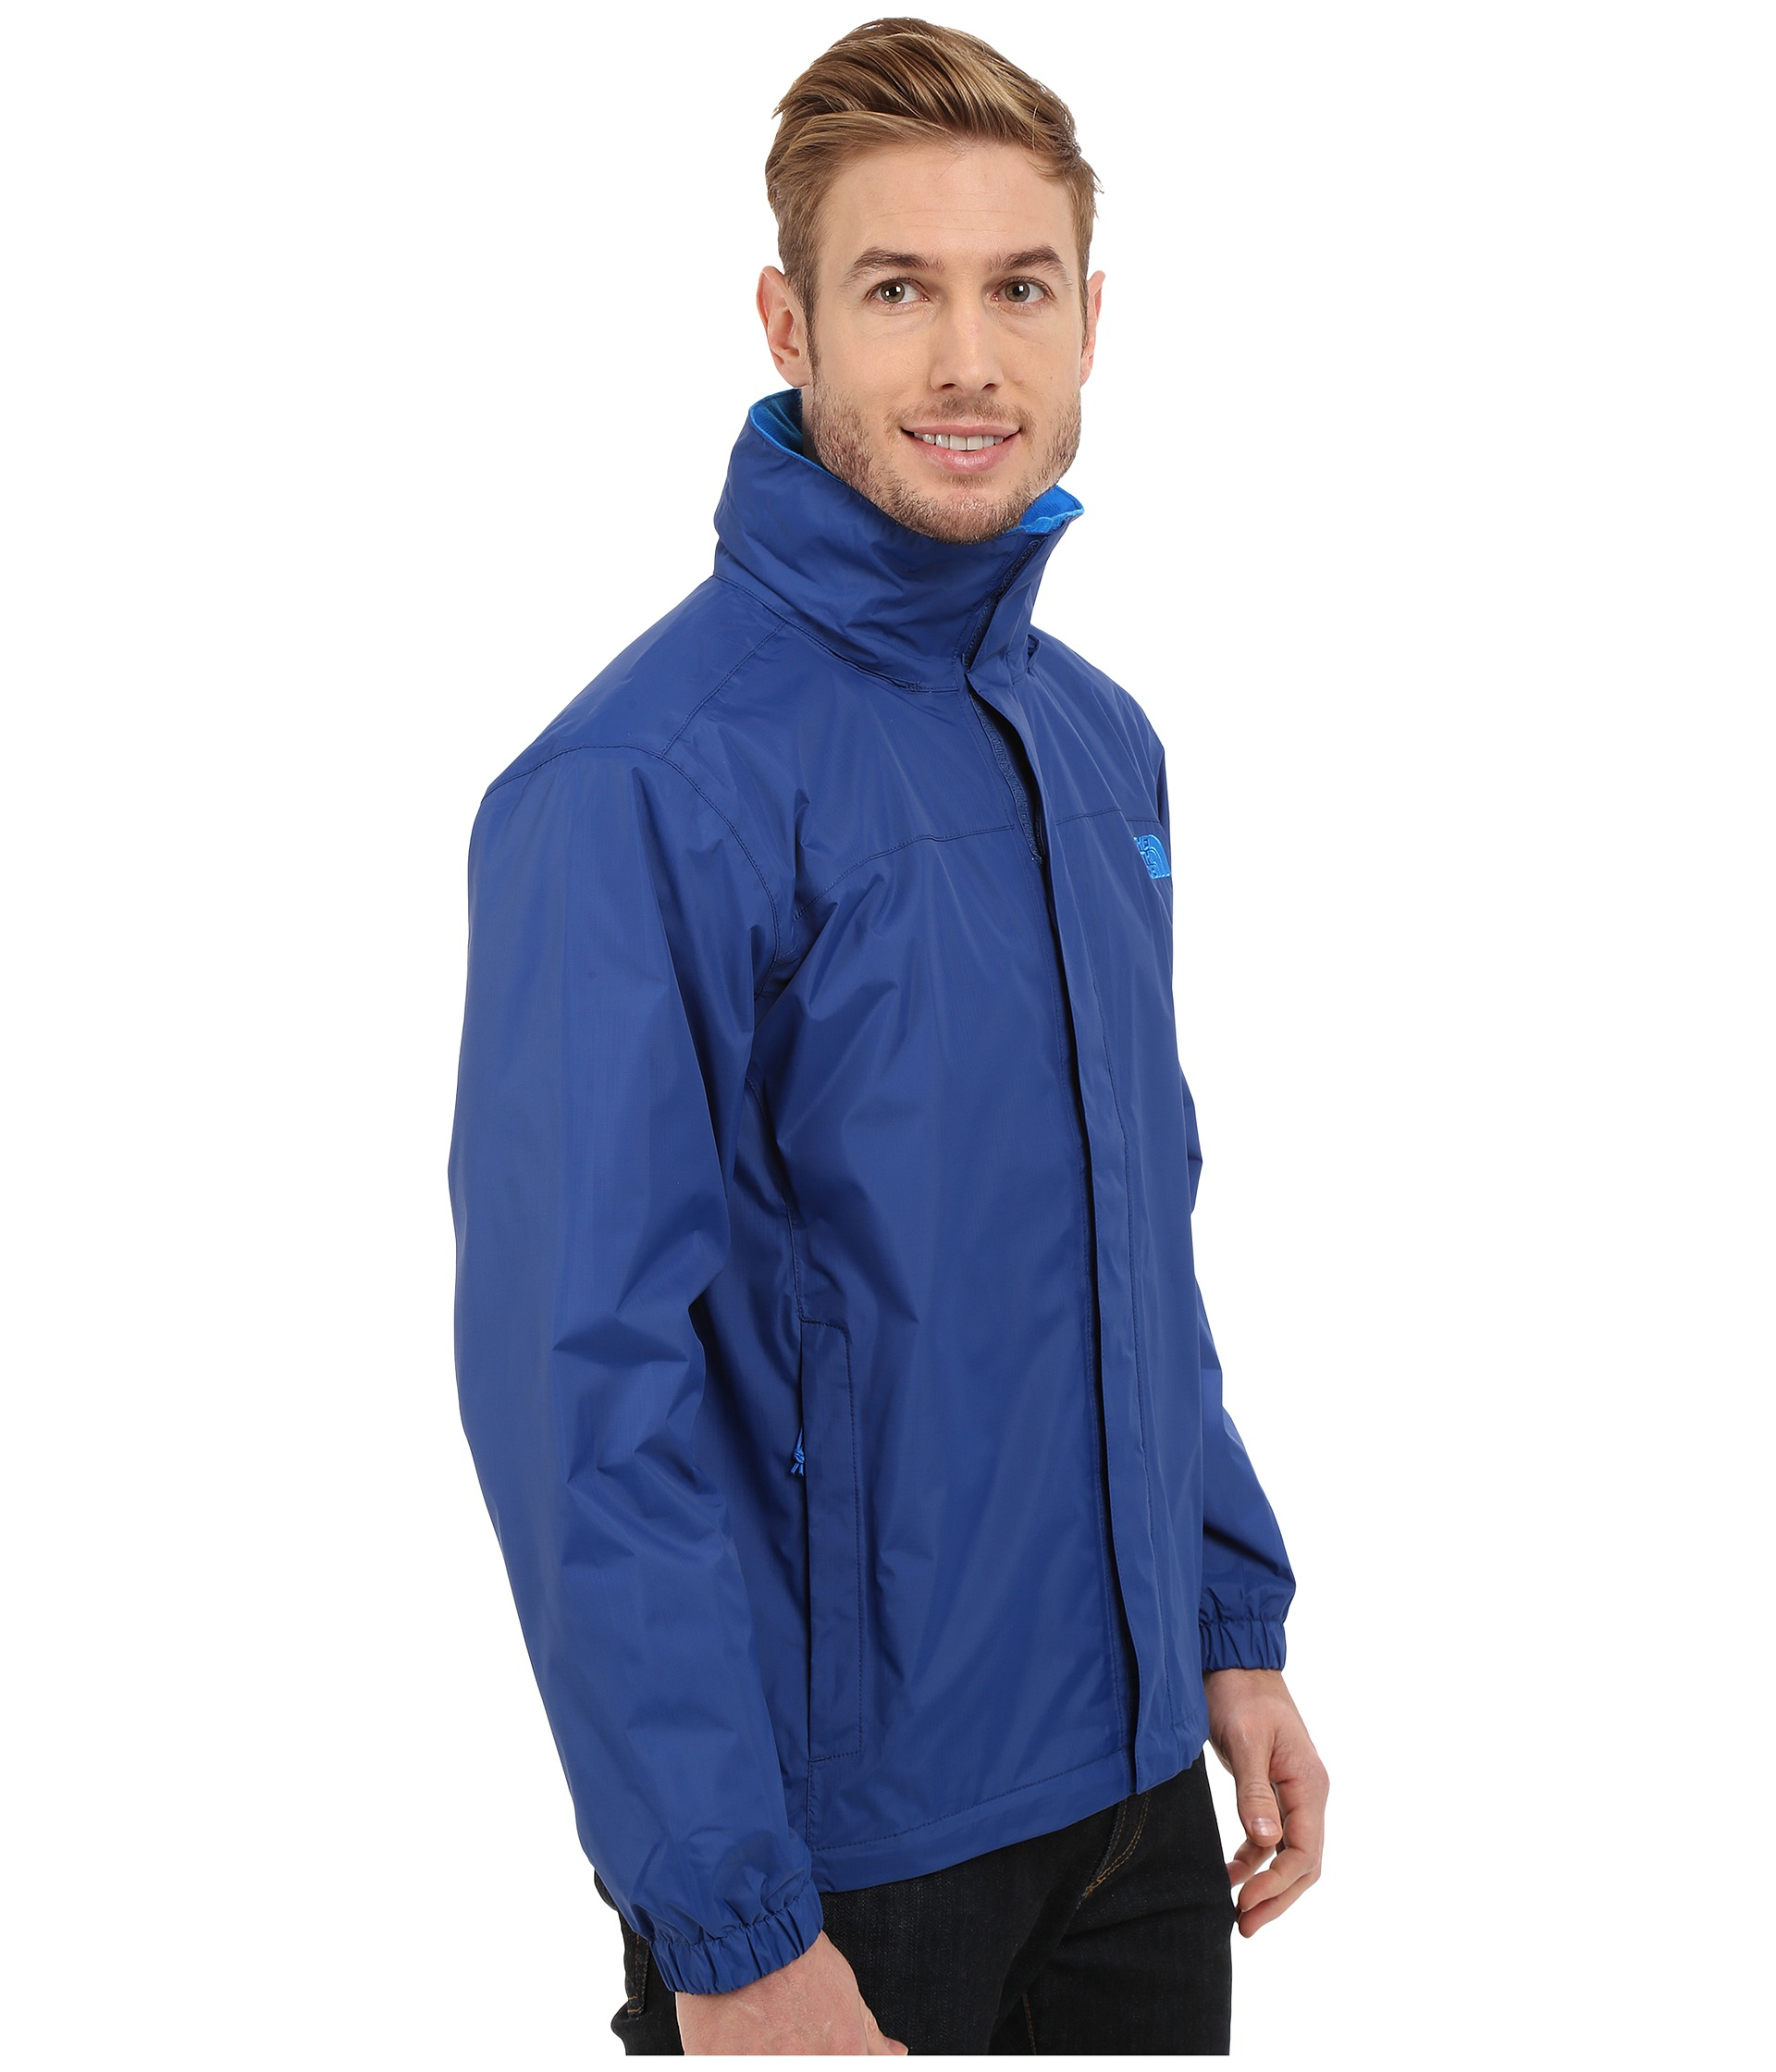 Lyst - The North Face Resolve Jacket in Blue for Men